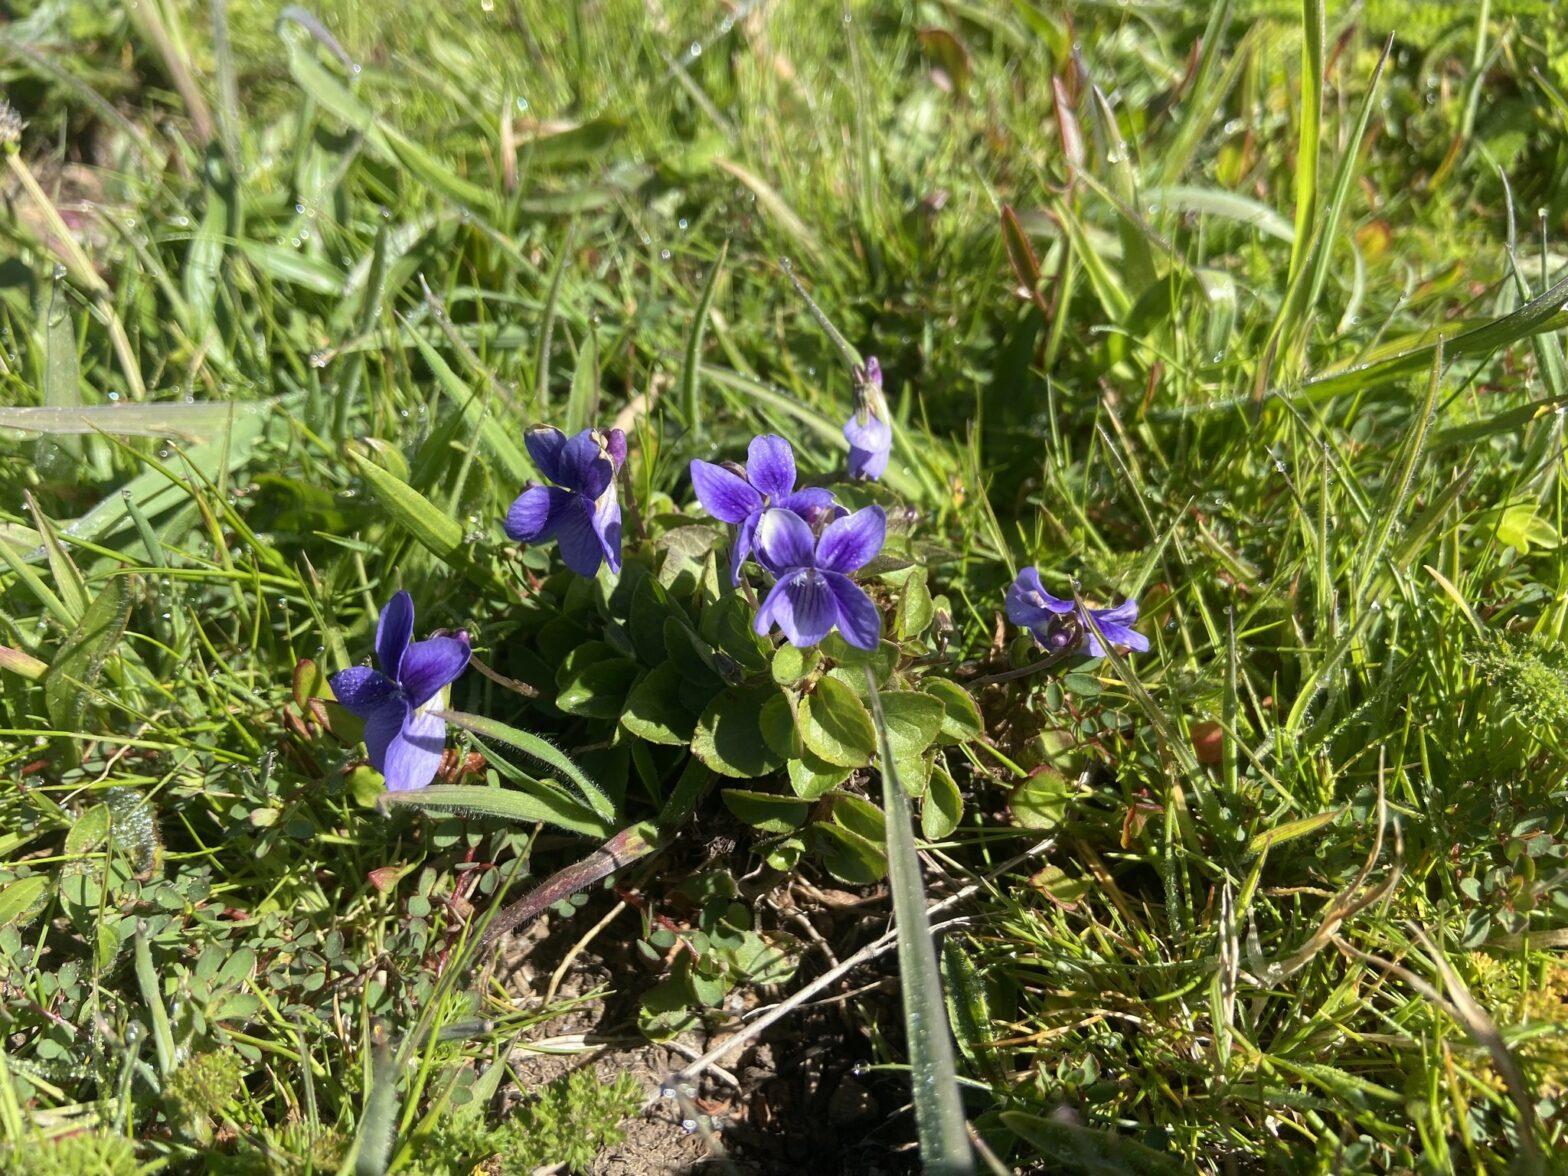 Photo of the early-blue violet wildflowers